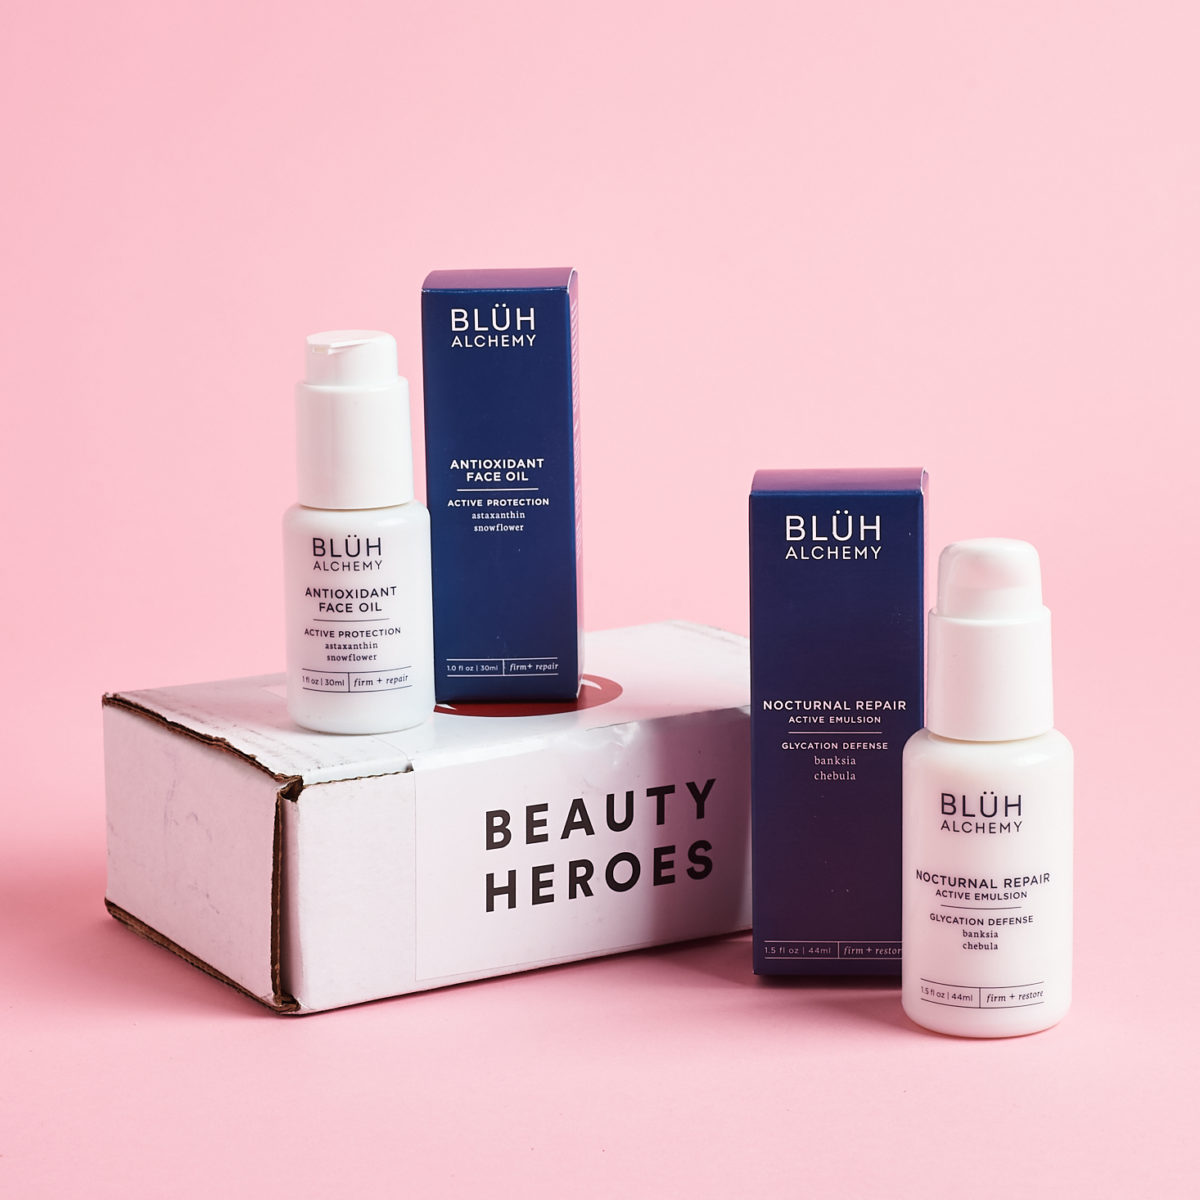 Beauty Heroes Beauty Discovery Review – June 2021